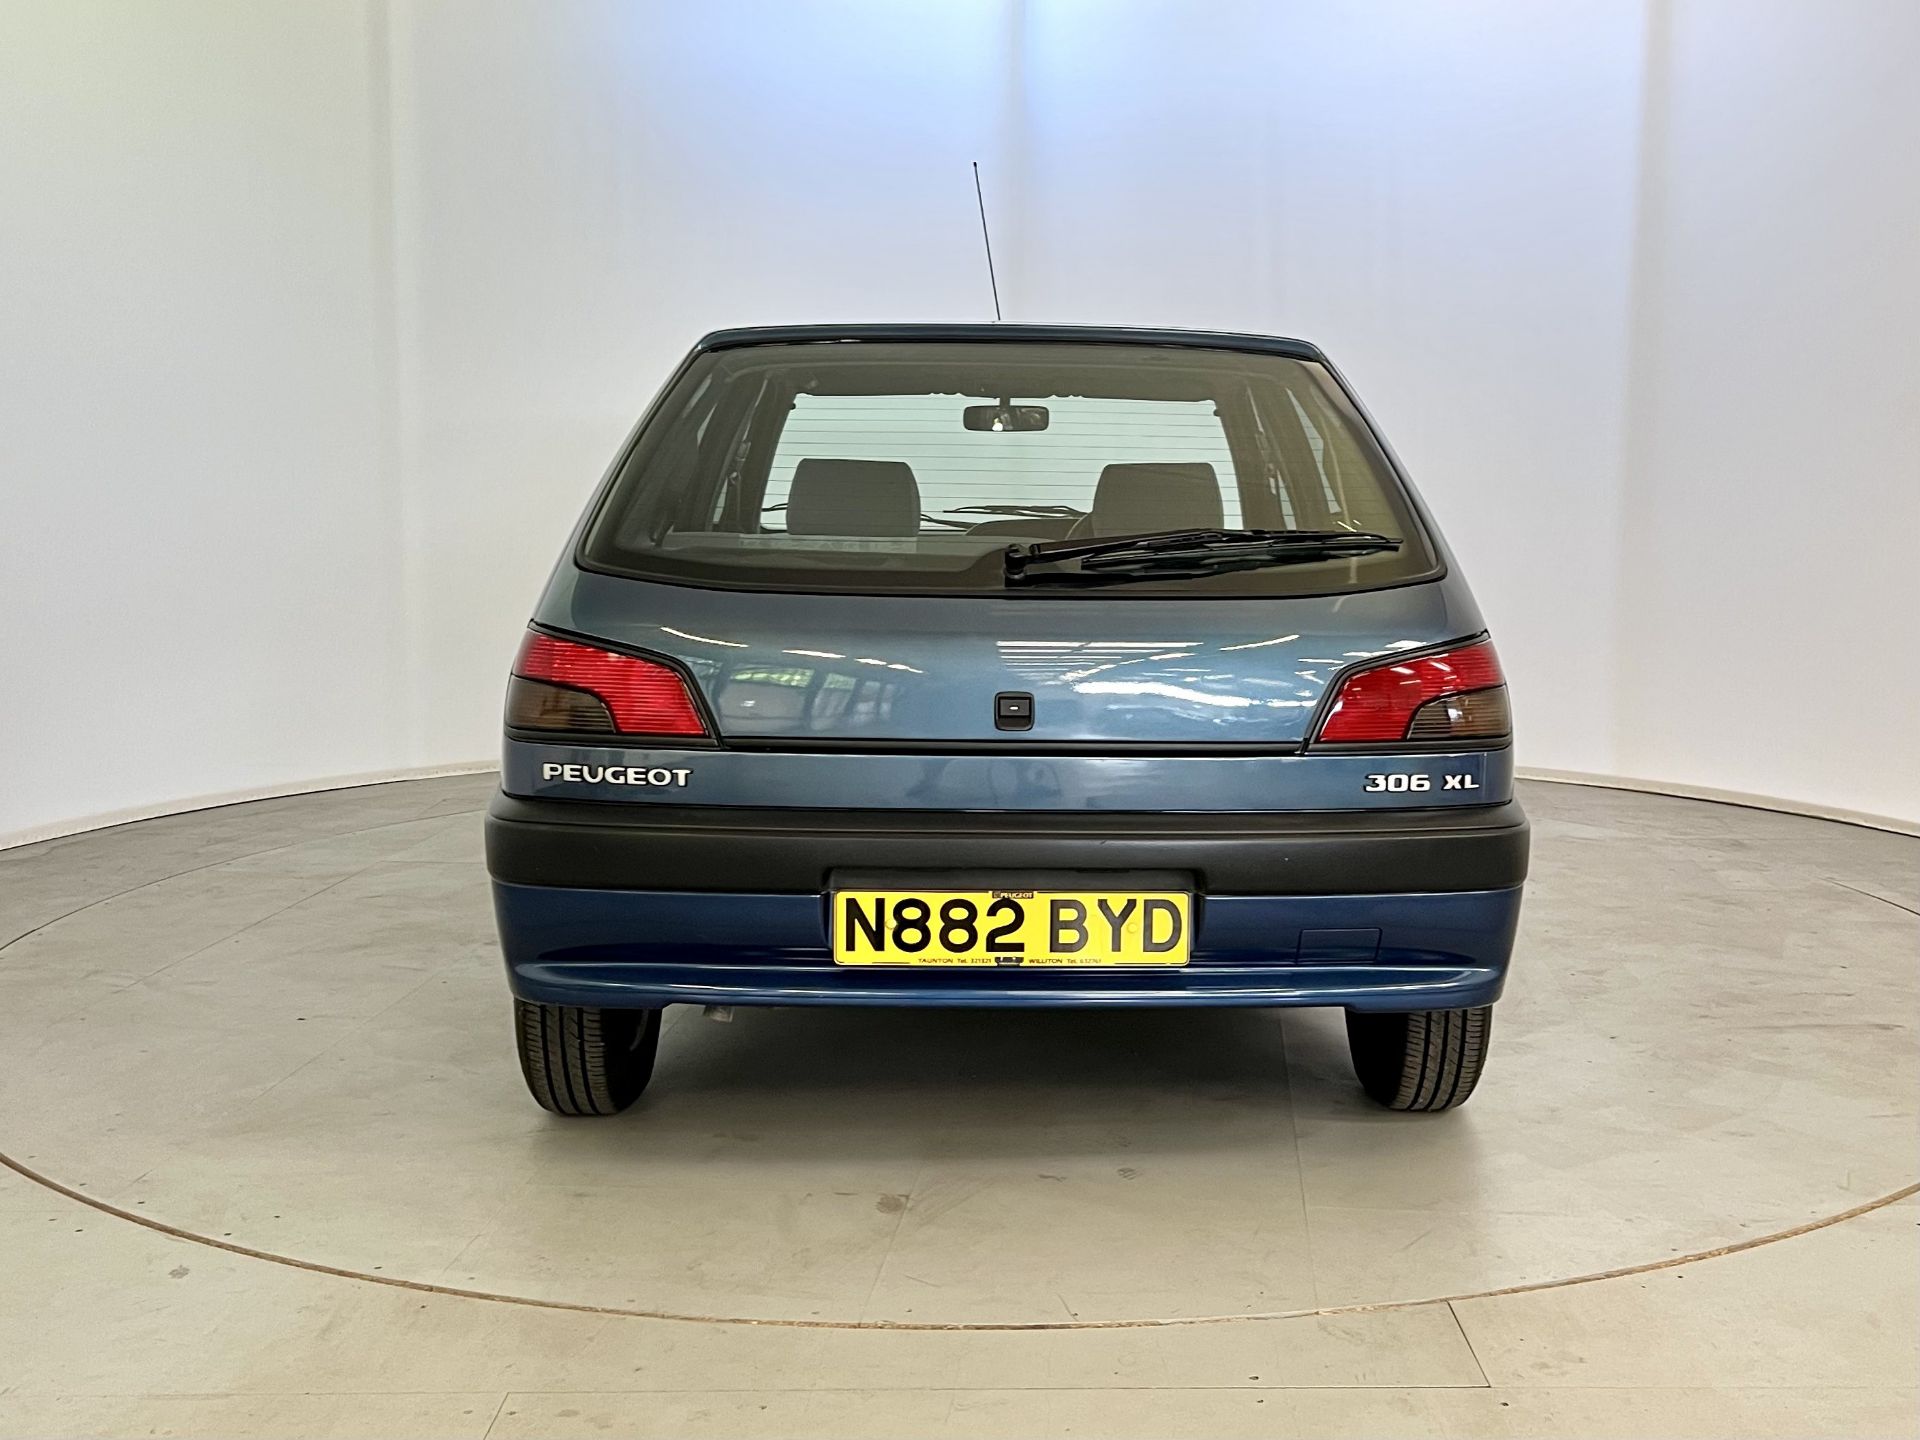 Peugeot 306 - Image 8 of 36